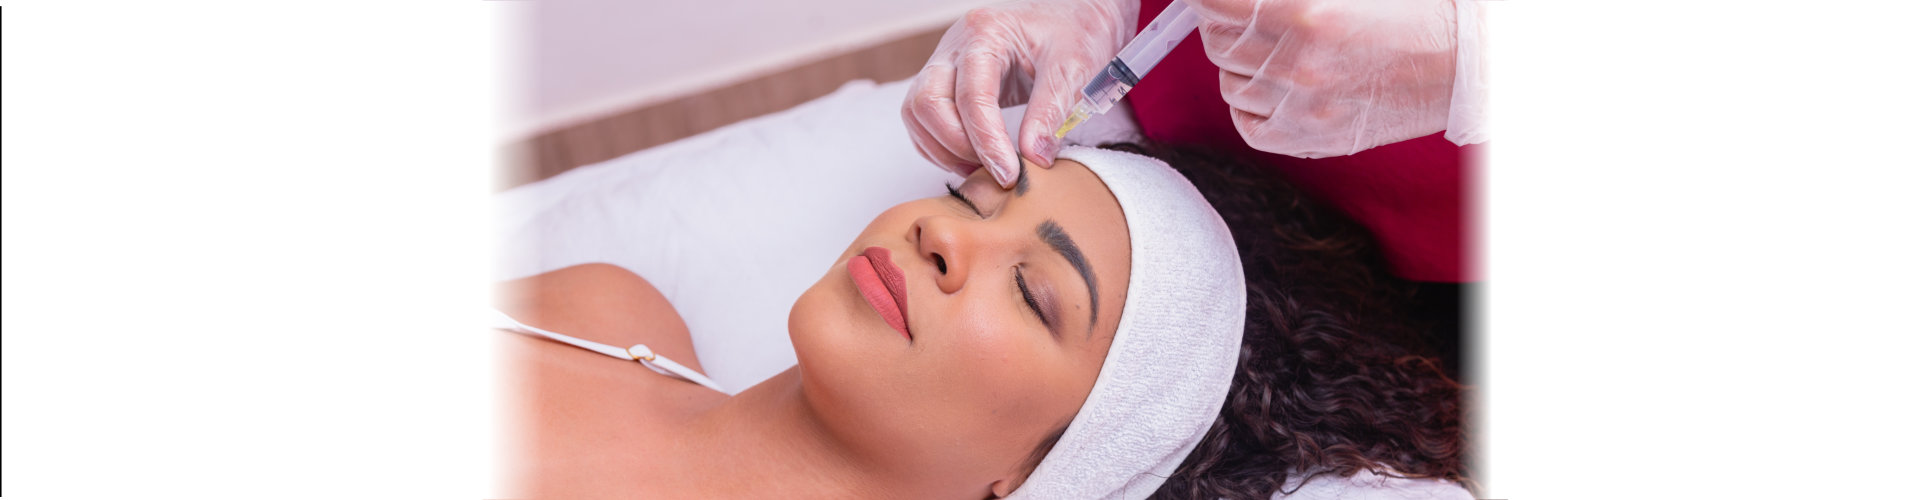 woman is getting a rejuvenating facial injections